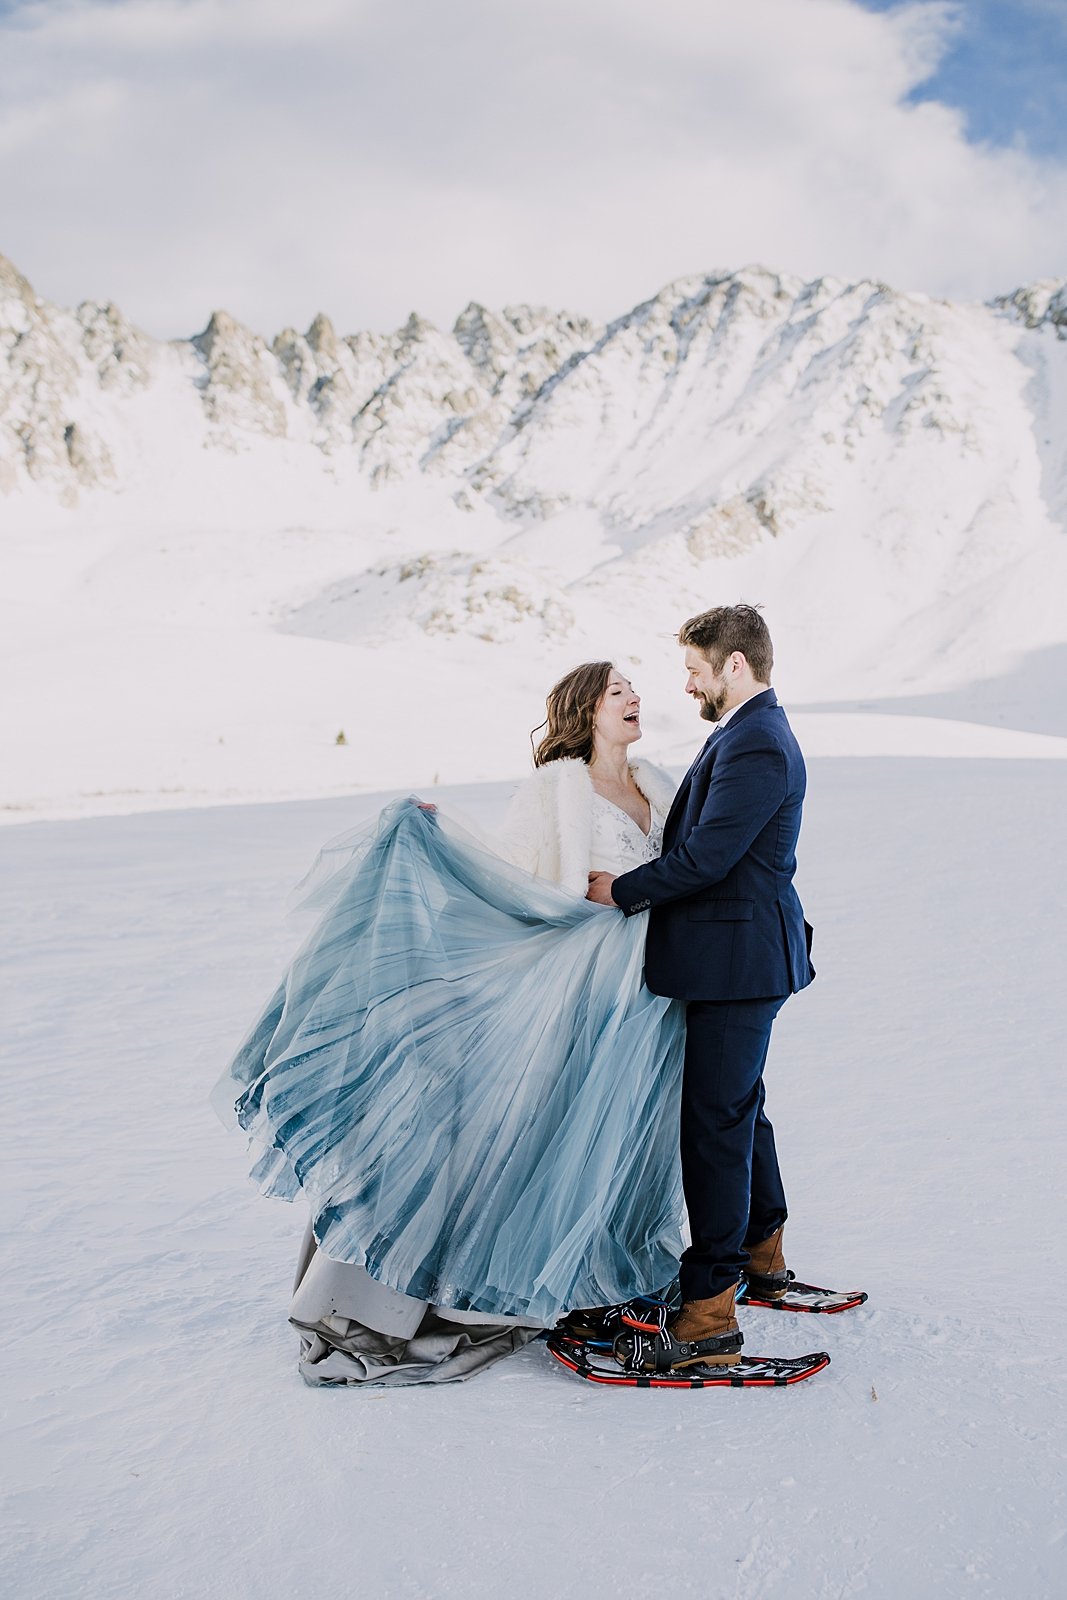 Bride and groom first dance in the snow, winter mountain elopement, yukon charlies womens snowshoes, colorado cabin wedding, bride swishing skirt, groom spinning bride